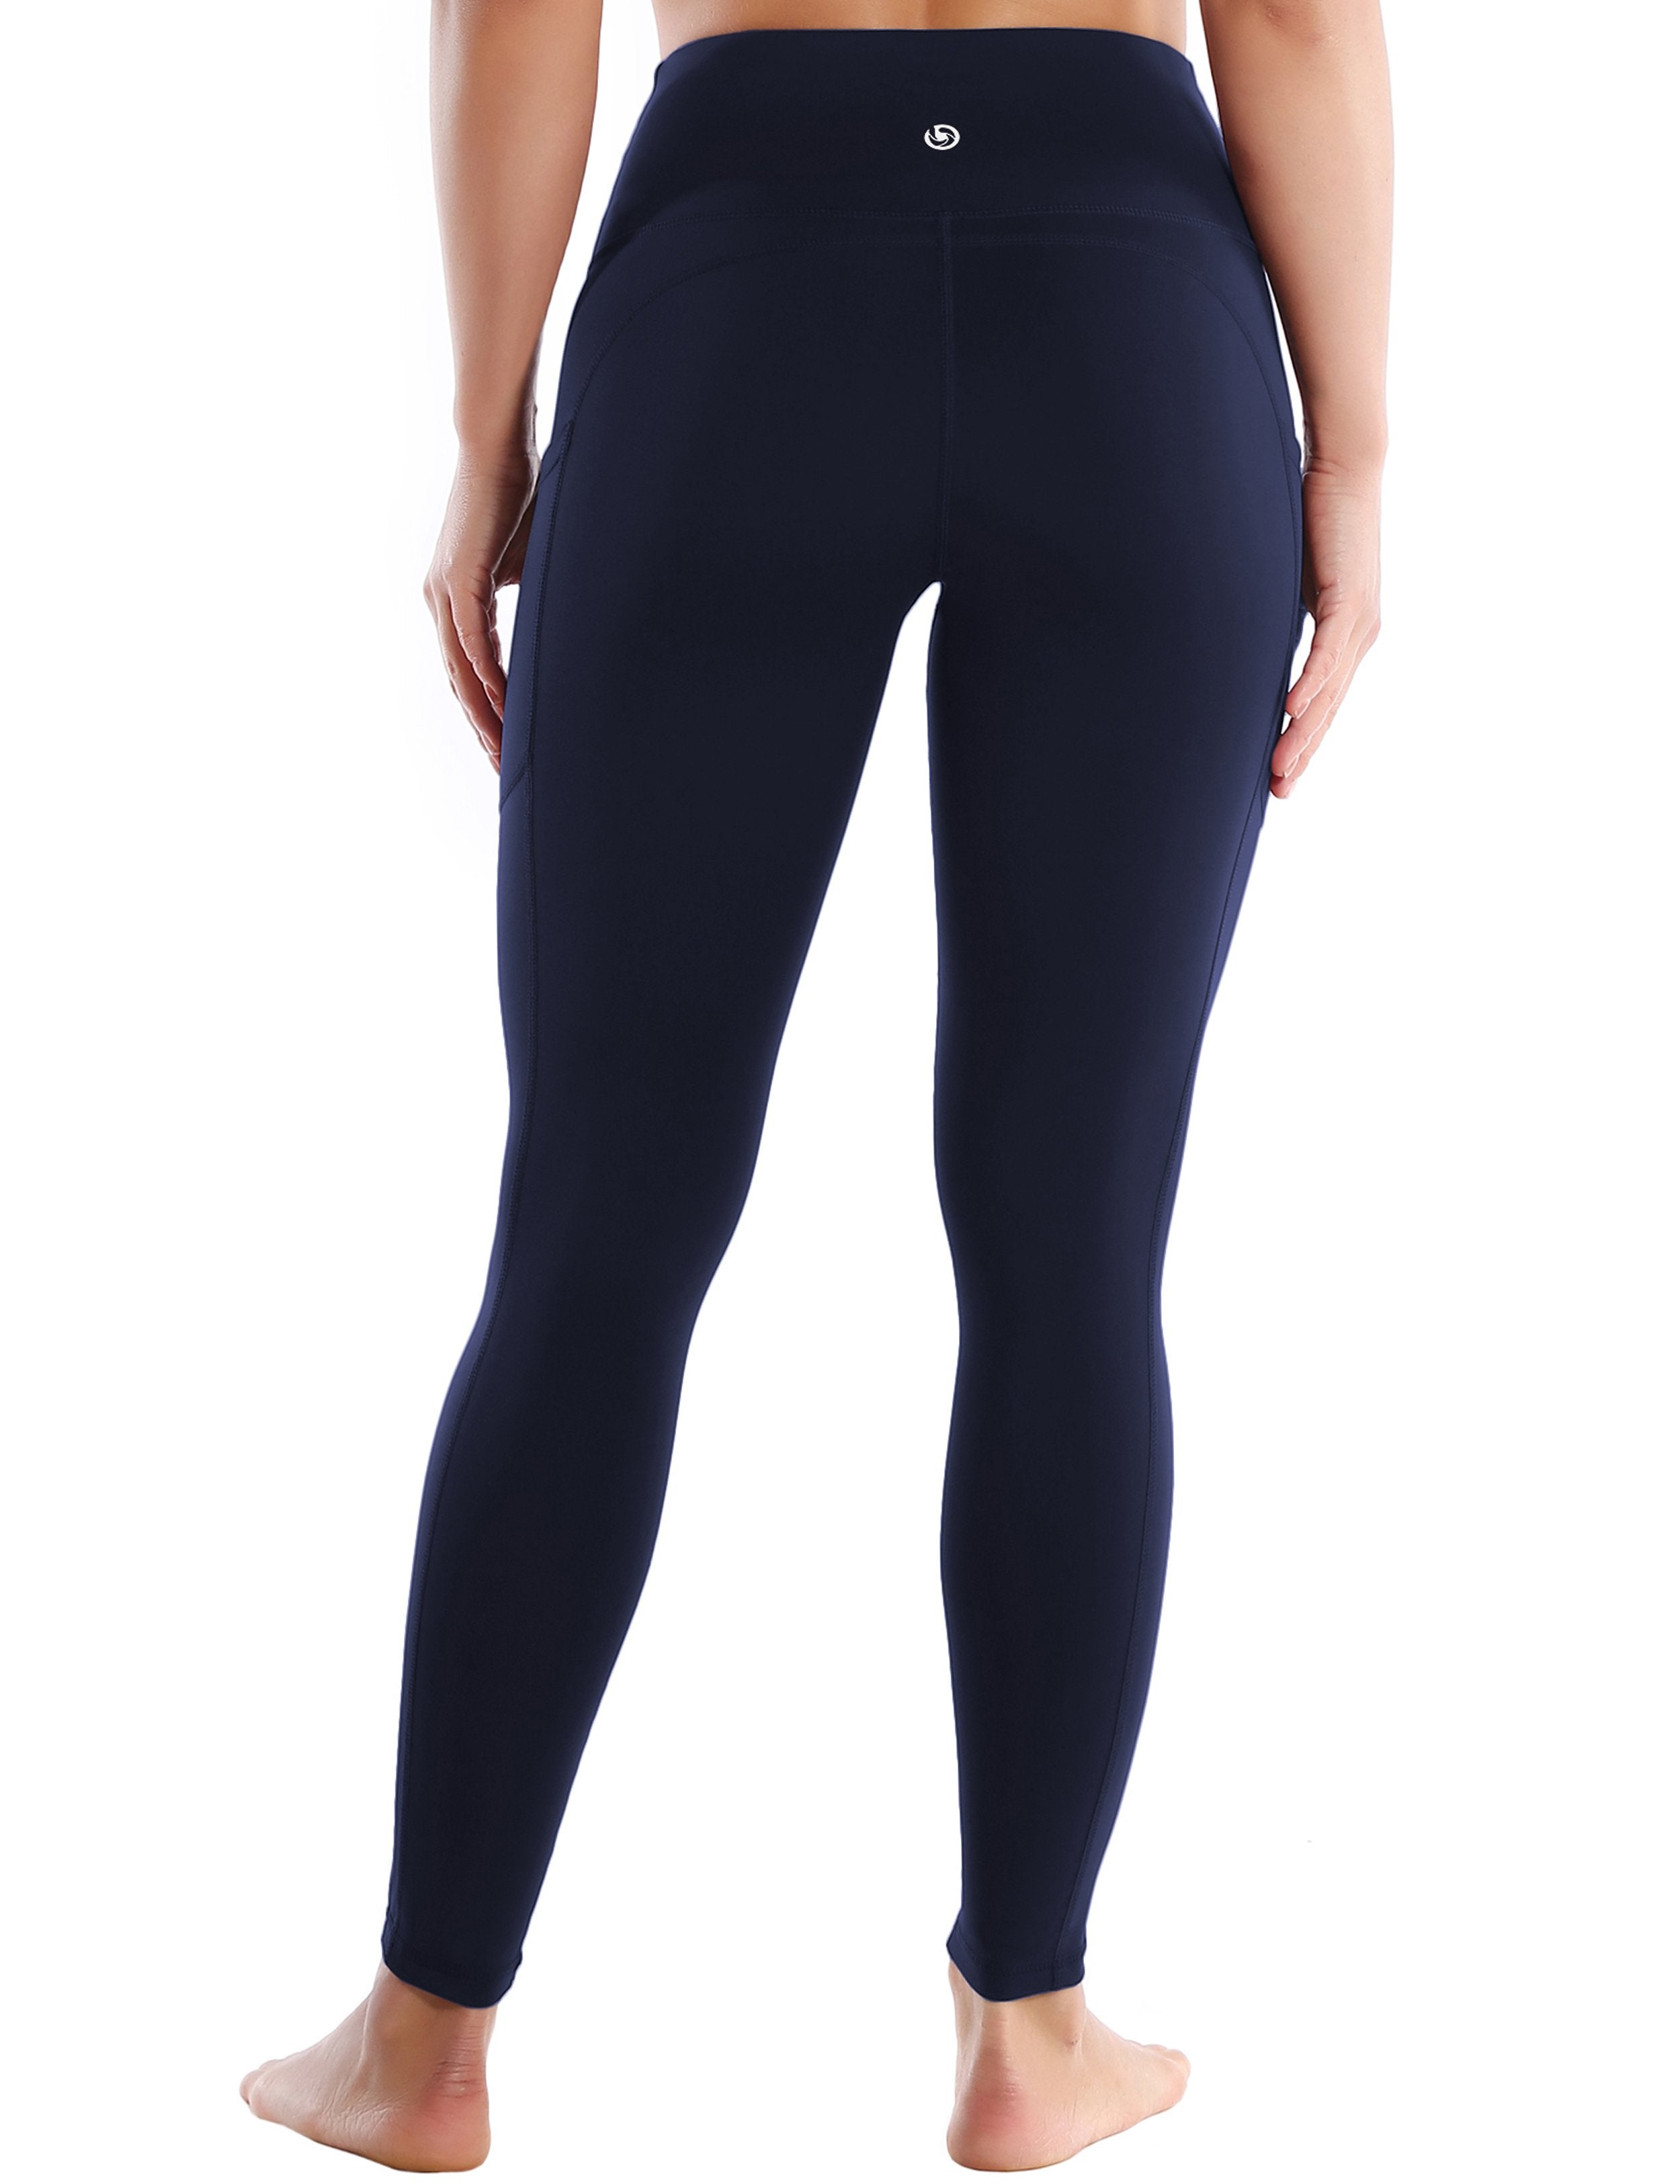 Hip Line Side Pockets Gym Pants darknavy Sexy Hip Line Side Pockets 75%Nylon/25%Spandex Fabric doesn't attract lint easily 4-way stretch No see-through Moisture-wicking Tummy control Inner pocket Two lengths